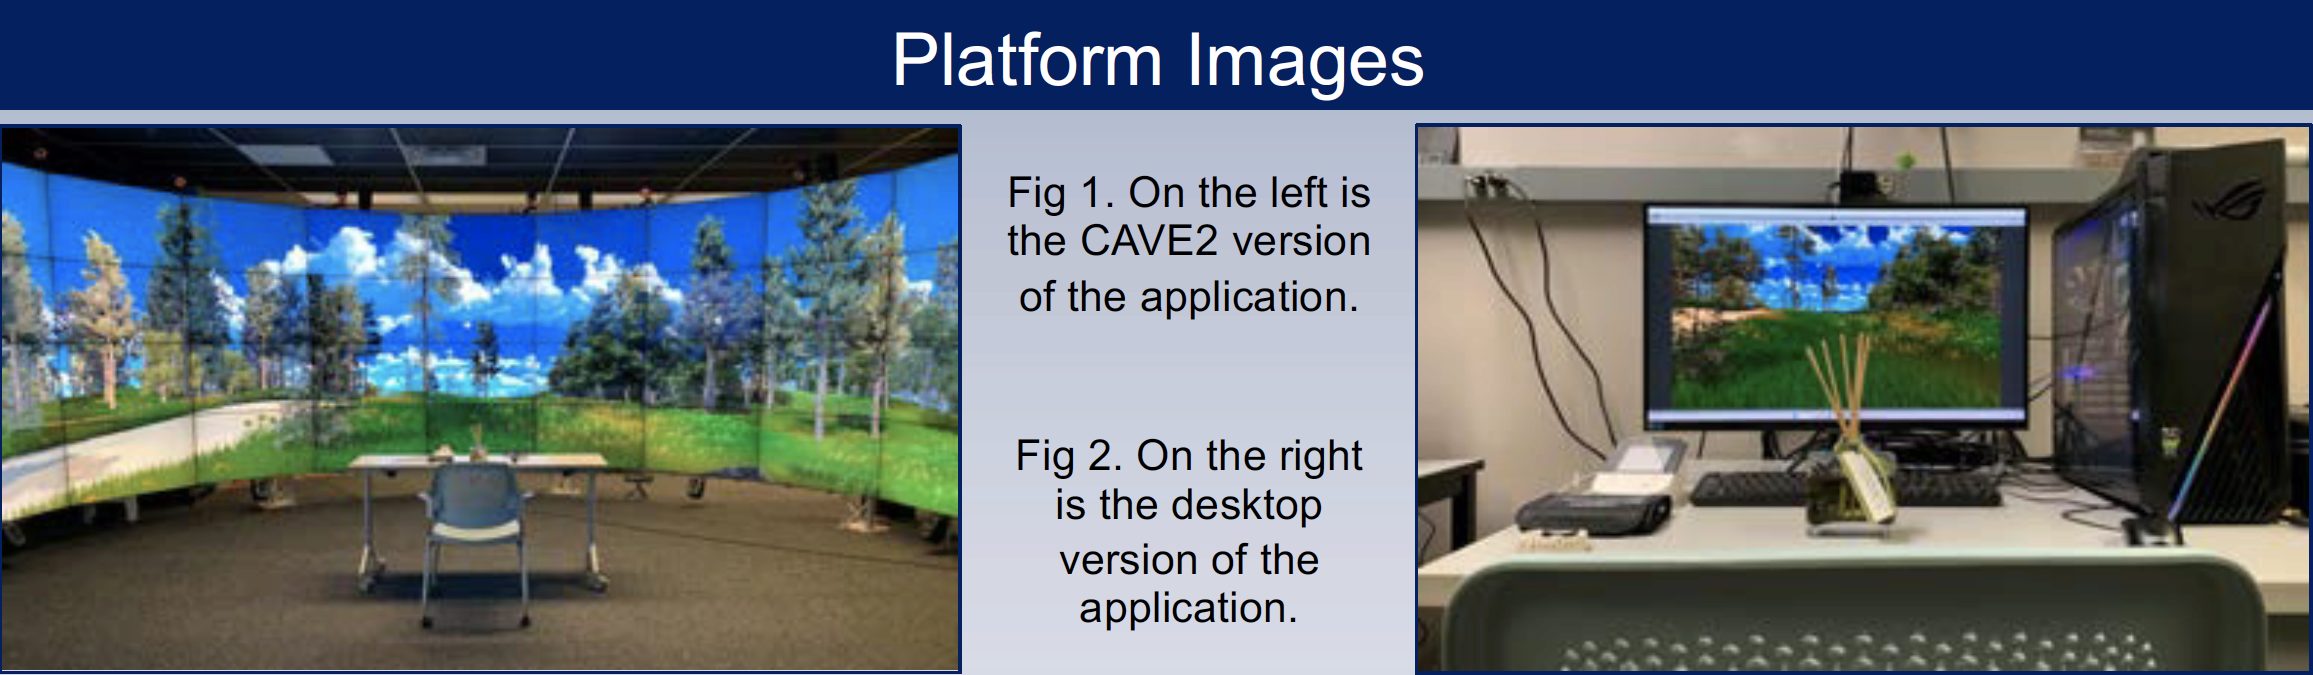 Fig 1. On the left is the CAVE2 version of the application. Fig 2. On the right is the desktop version of the application.